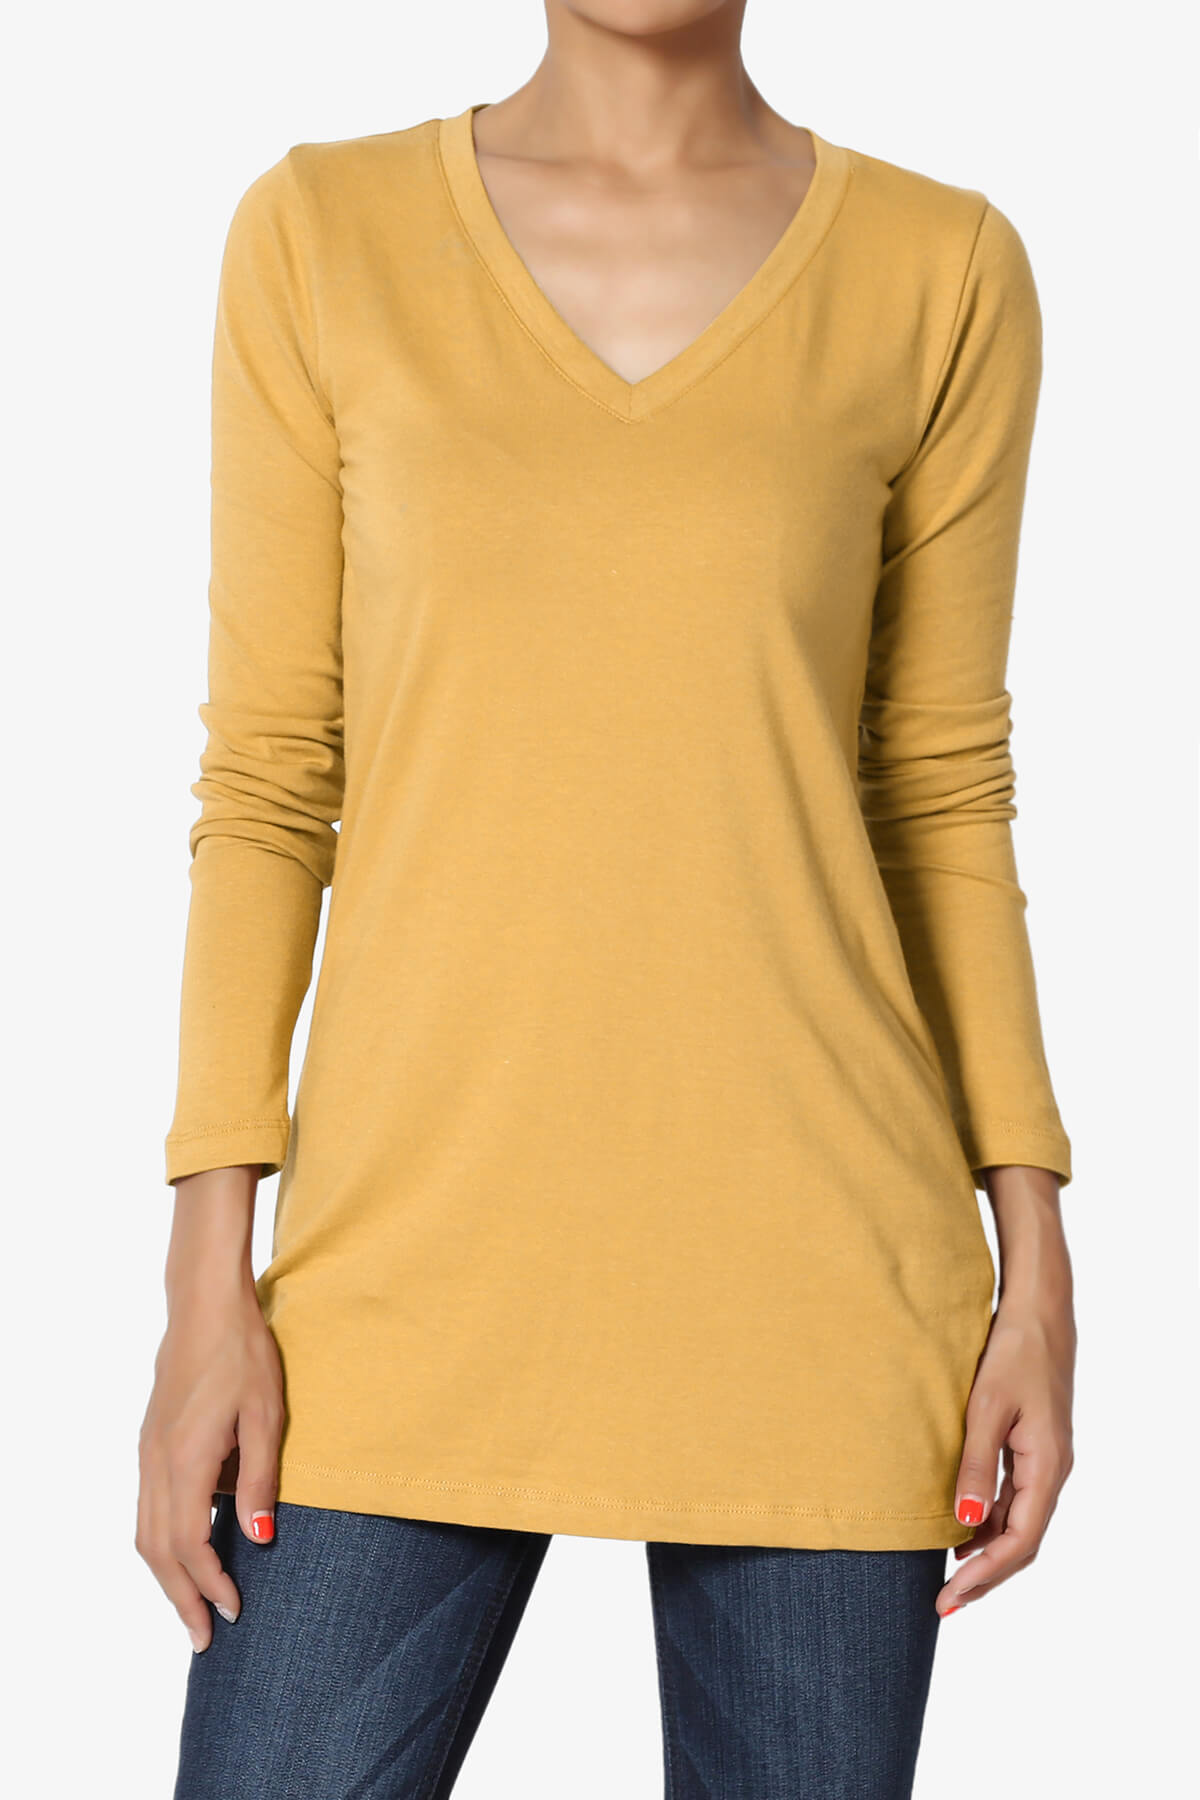 Load image into Gallery viewer, Lasso Cotton V-Neck Long Sleeve Tee LIGHT MUSTARD_1
